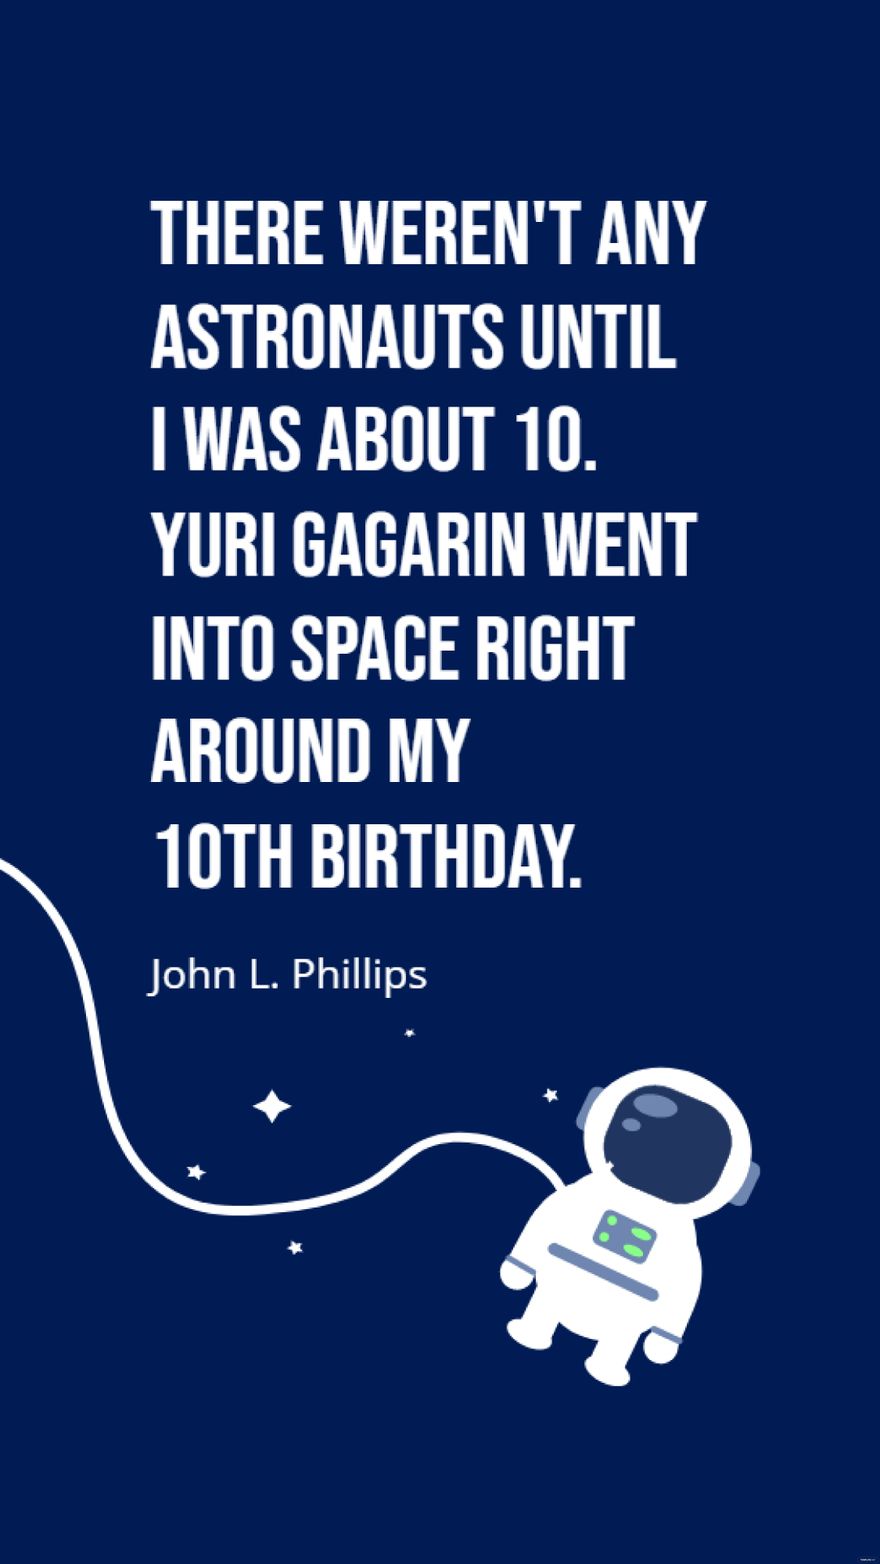 Free John L. Phillips - There weren't any astronauts until I was about 10. Yuri Gagarin went into space right around my 10th birthday. in JPG